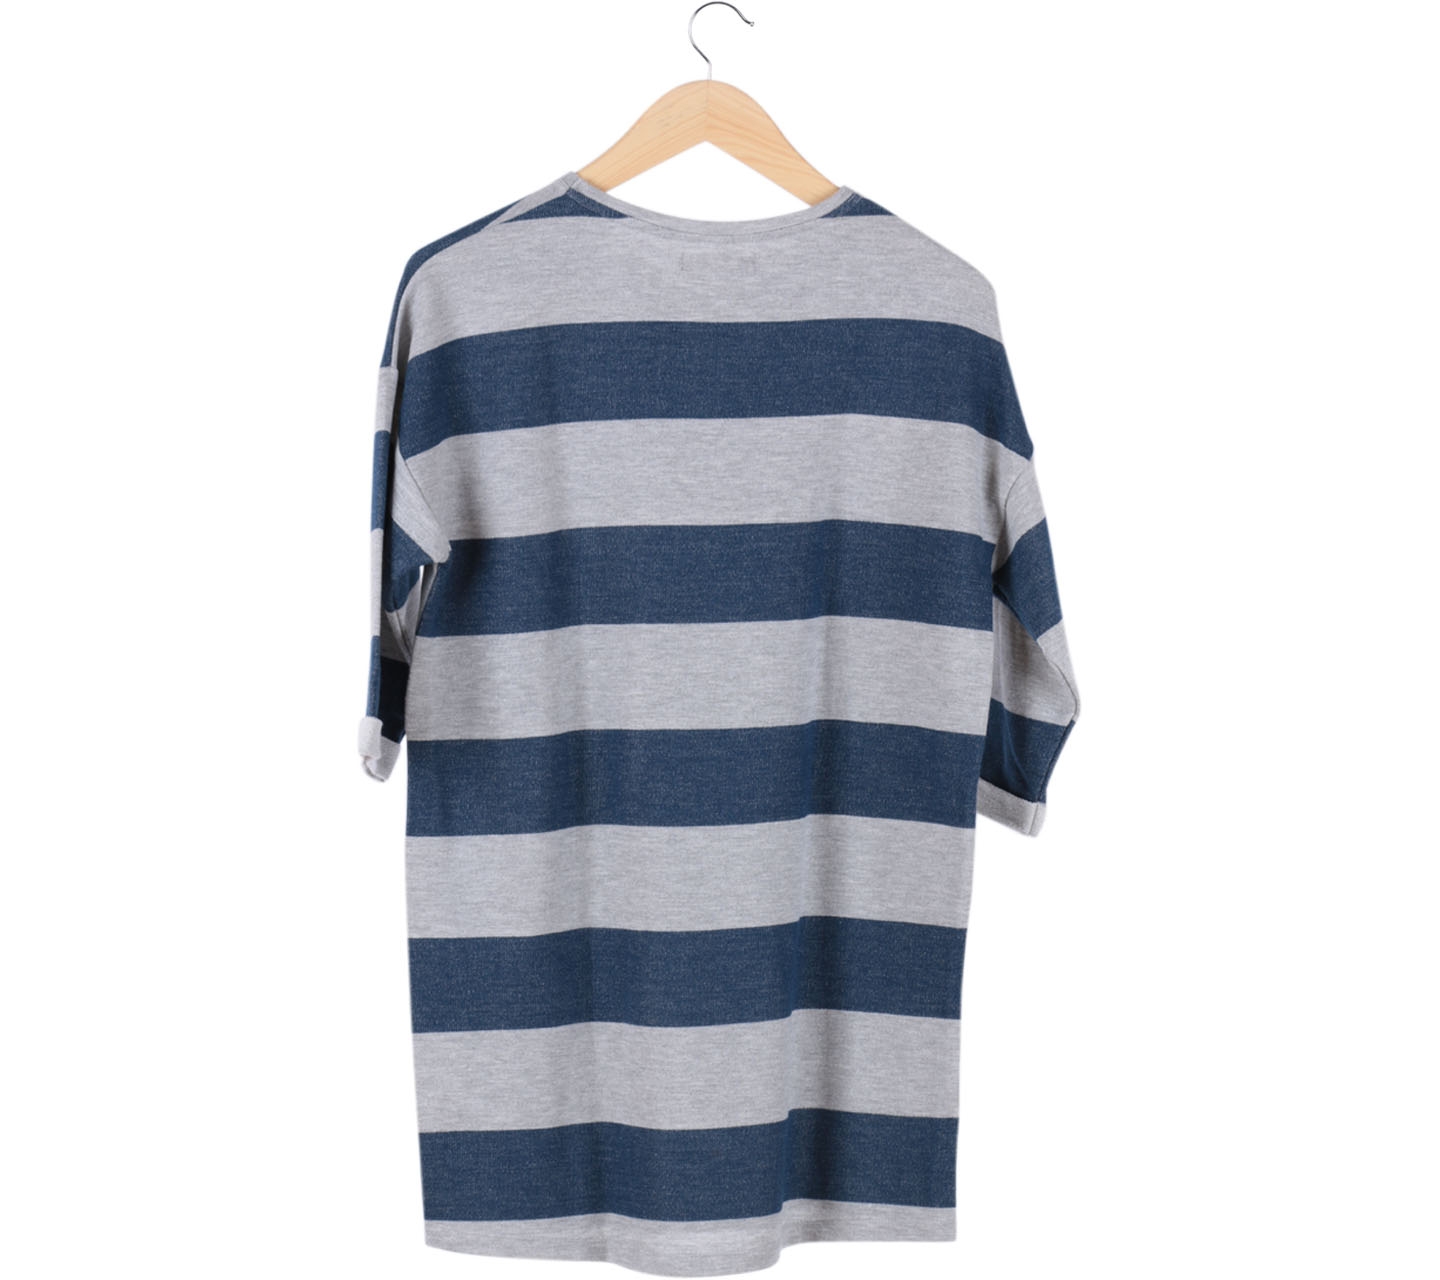 Pull & Bear Grey And Blue Stripped Blouse